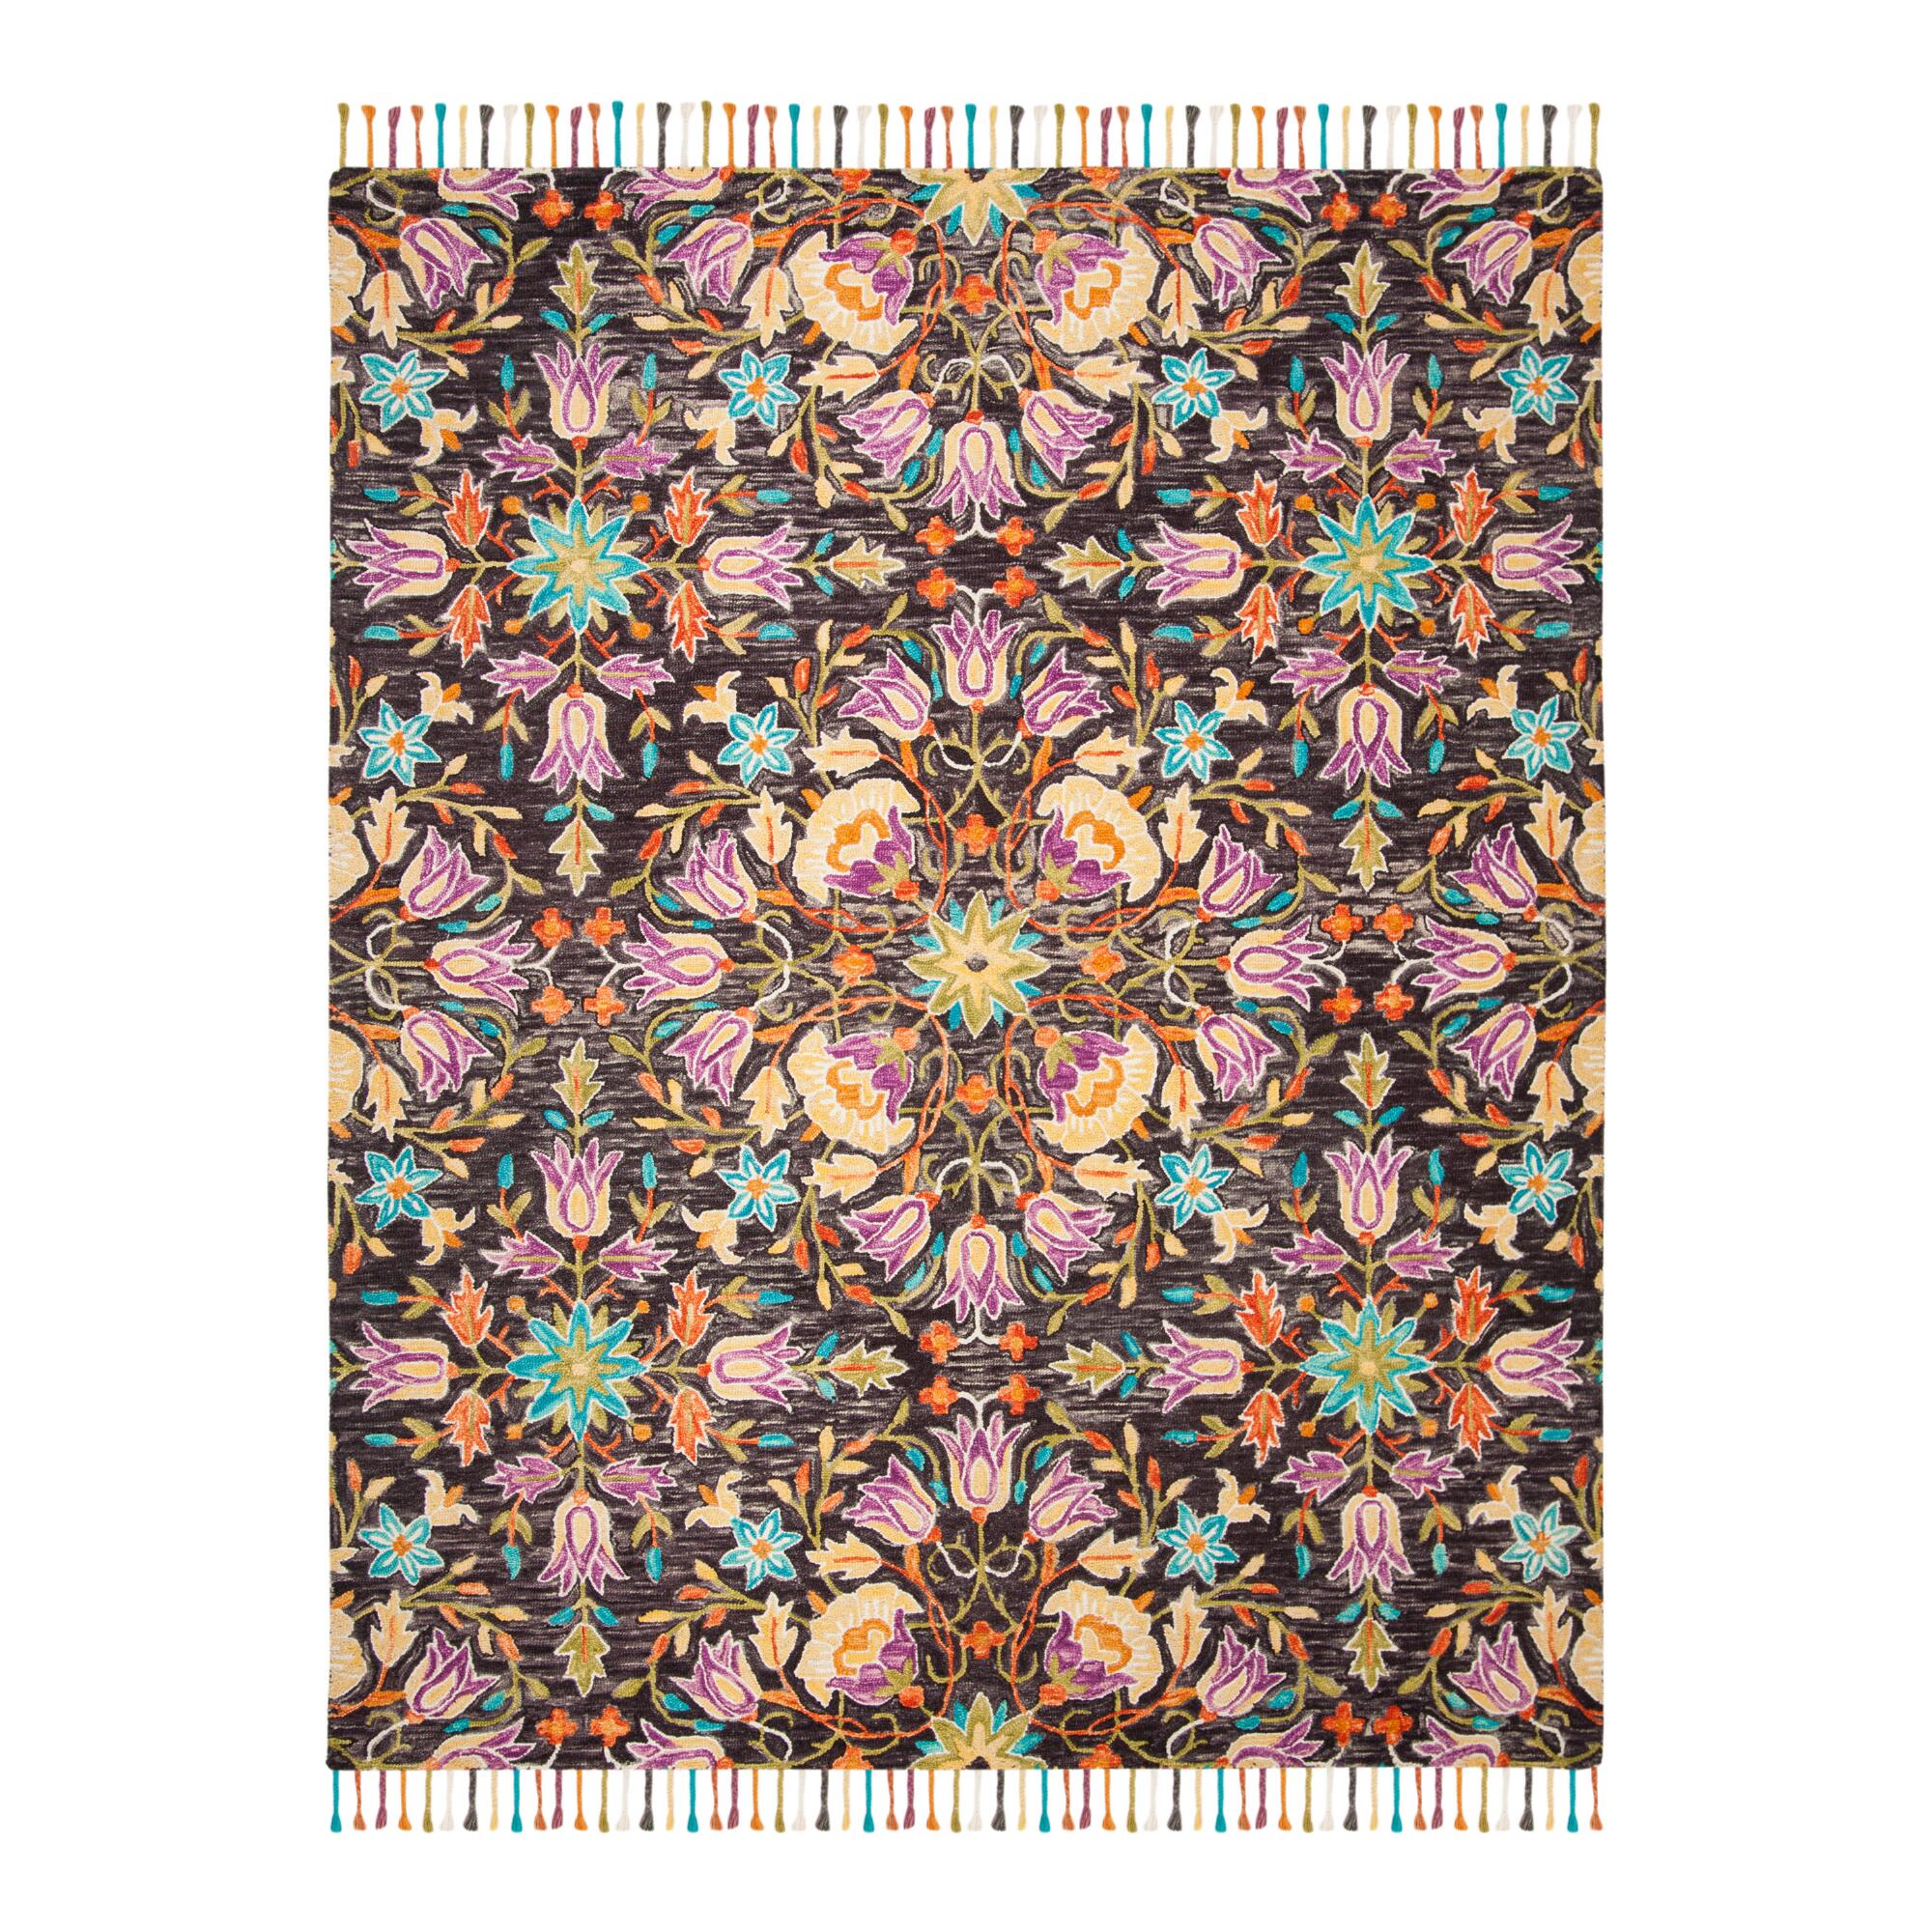 Black And Purple Floral Wool Brianna Area Rug: Multi - 8' x 10' by World Market